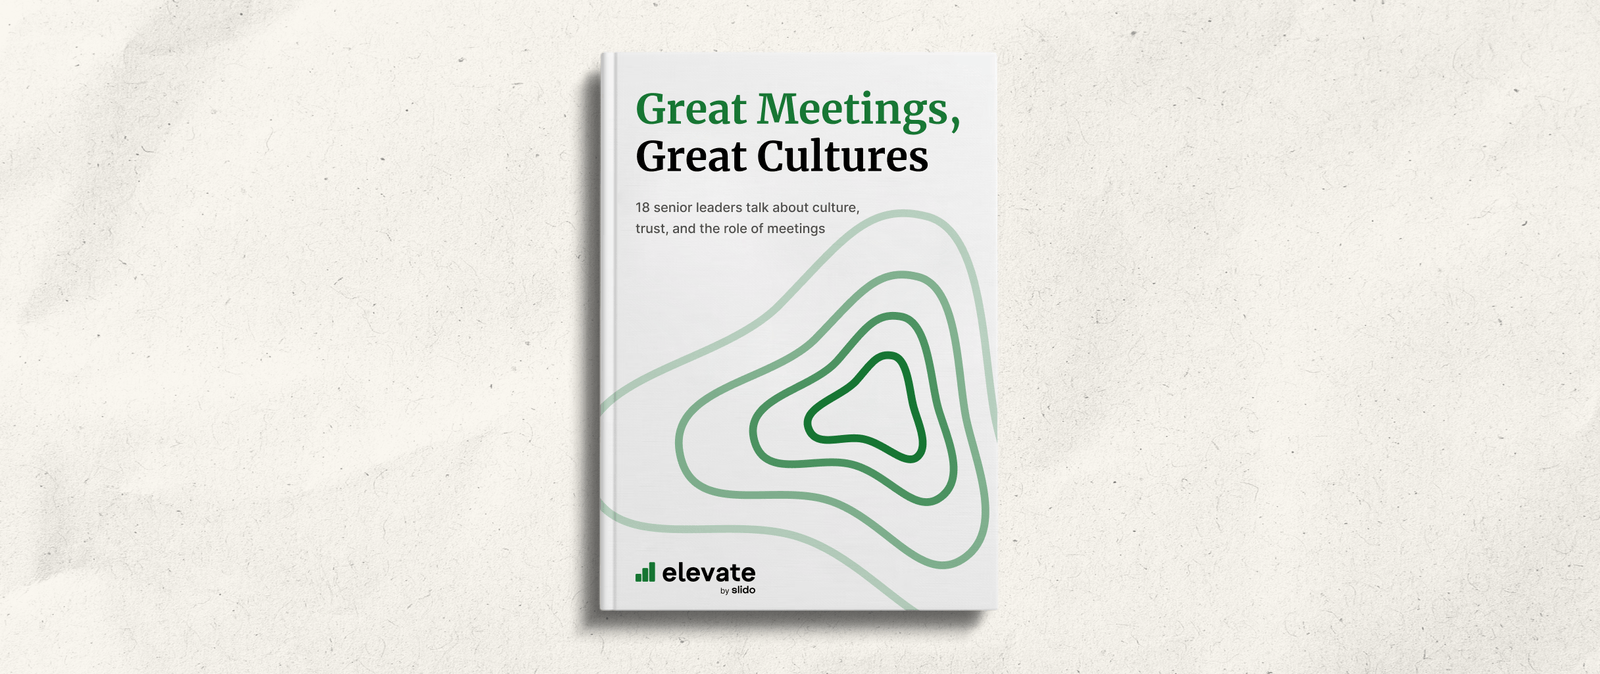 The book called Great Meetings, great cultures.